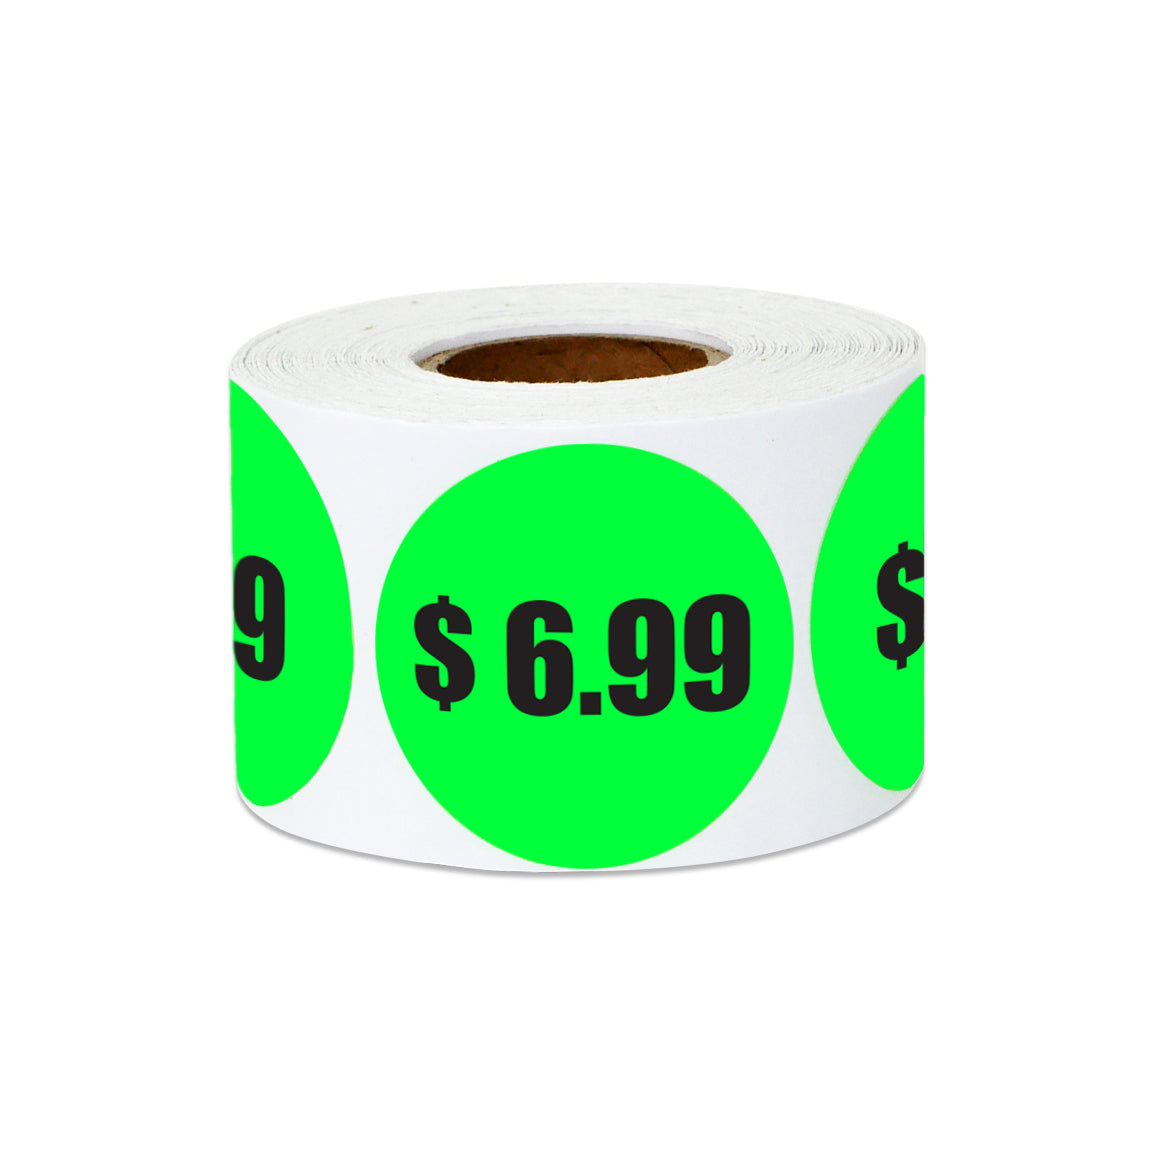 1.5 inch | Retail & Sale: $6.99 Six Dollars and 99 Cents Pricing Stickers